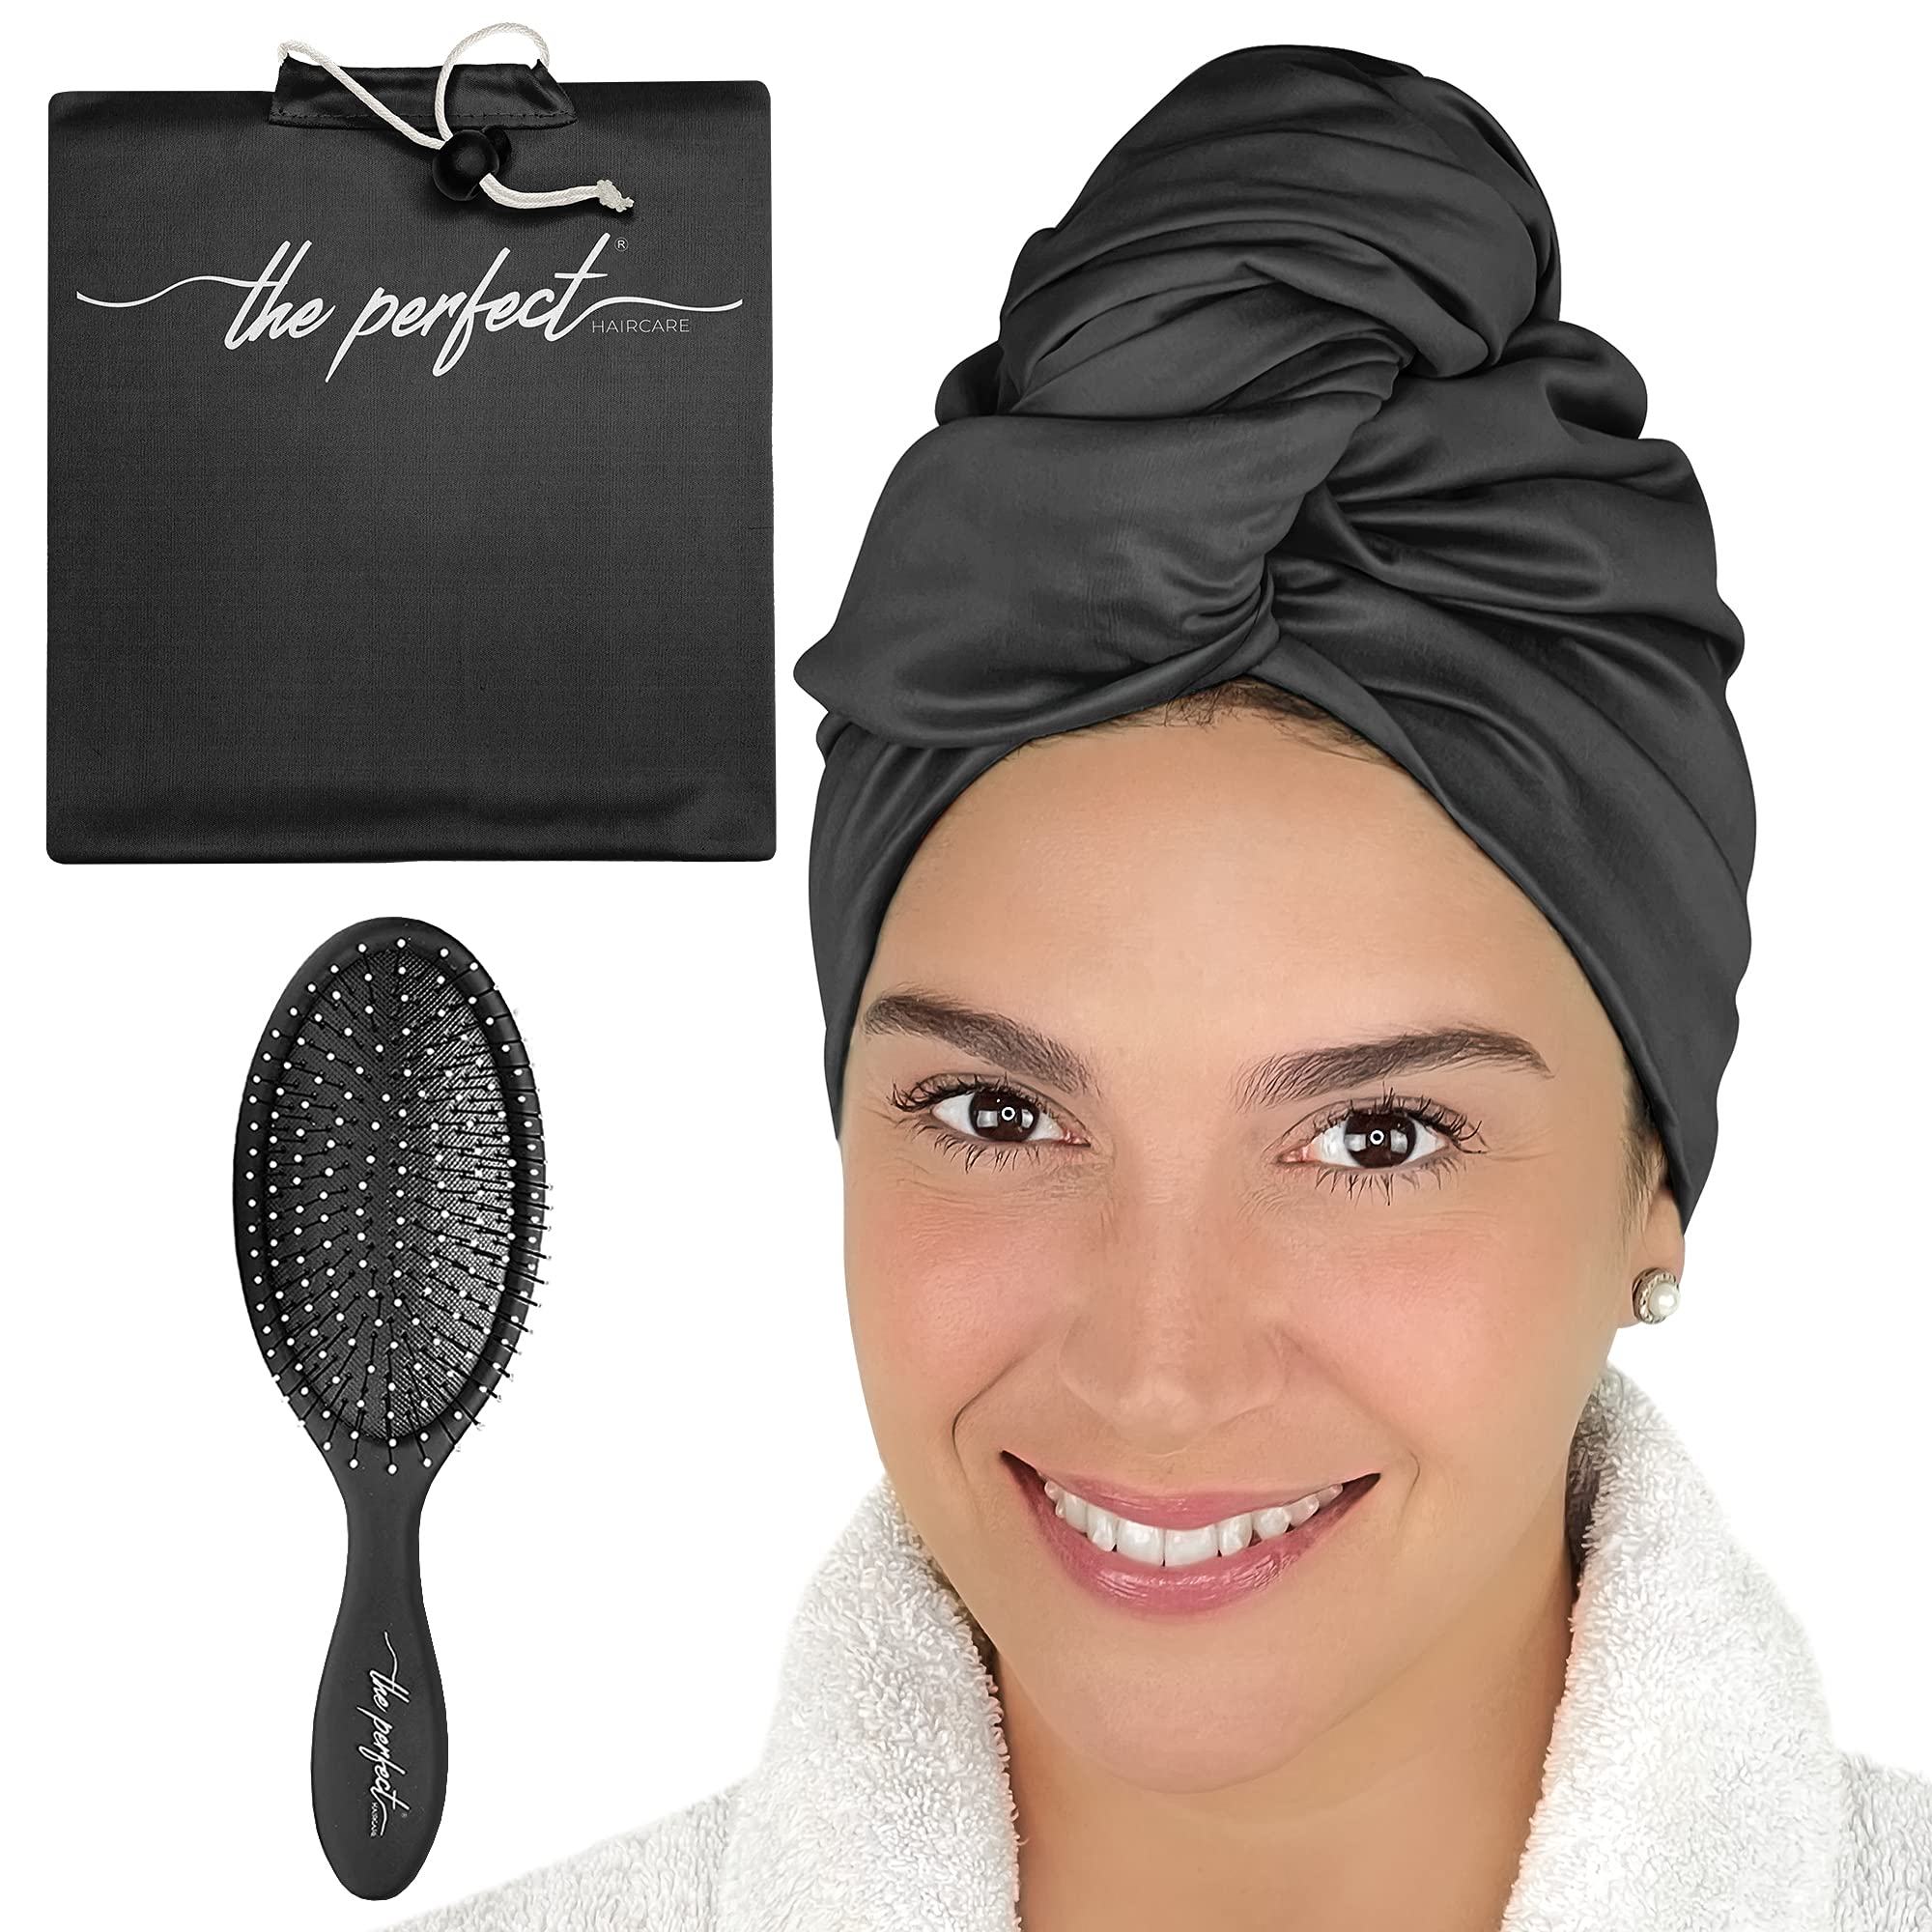 Book Cover THE PERFECT HAIRCARE Ultra-Fine Microfiber Hair Towel Wrap & Wet/Dry Detangling Hair Brush Anti-Frizz Turban for Curly or Wavy Haired Women Girls & Kids - Quick Drying - Good for Travel (Black)